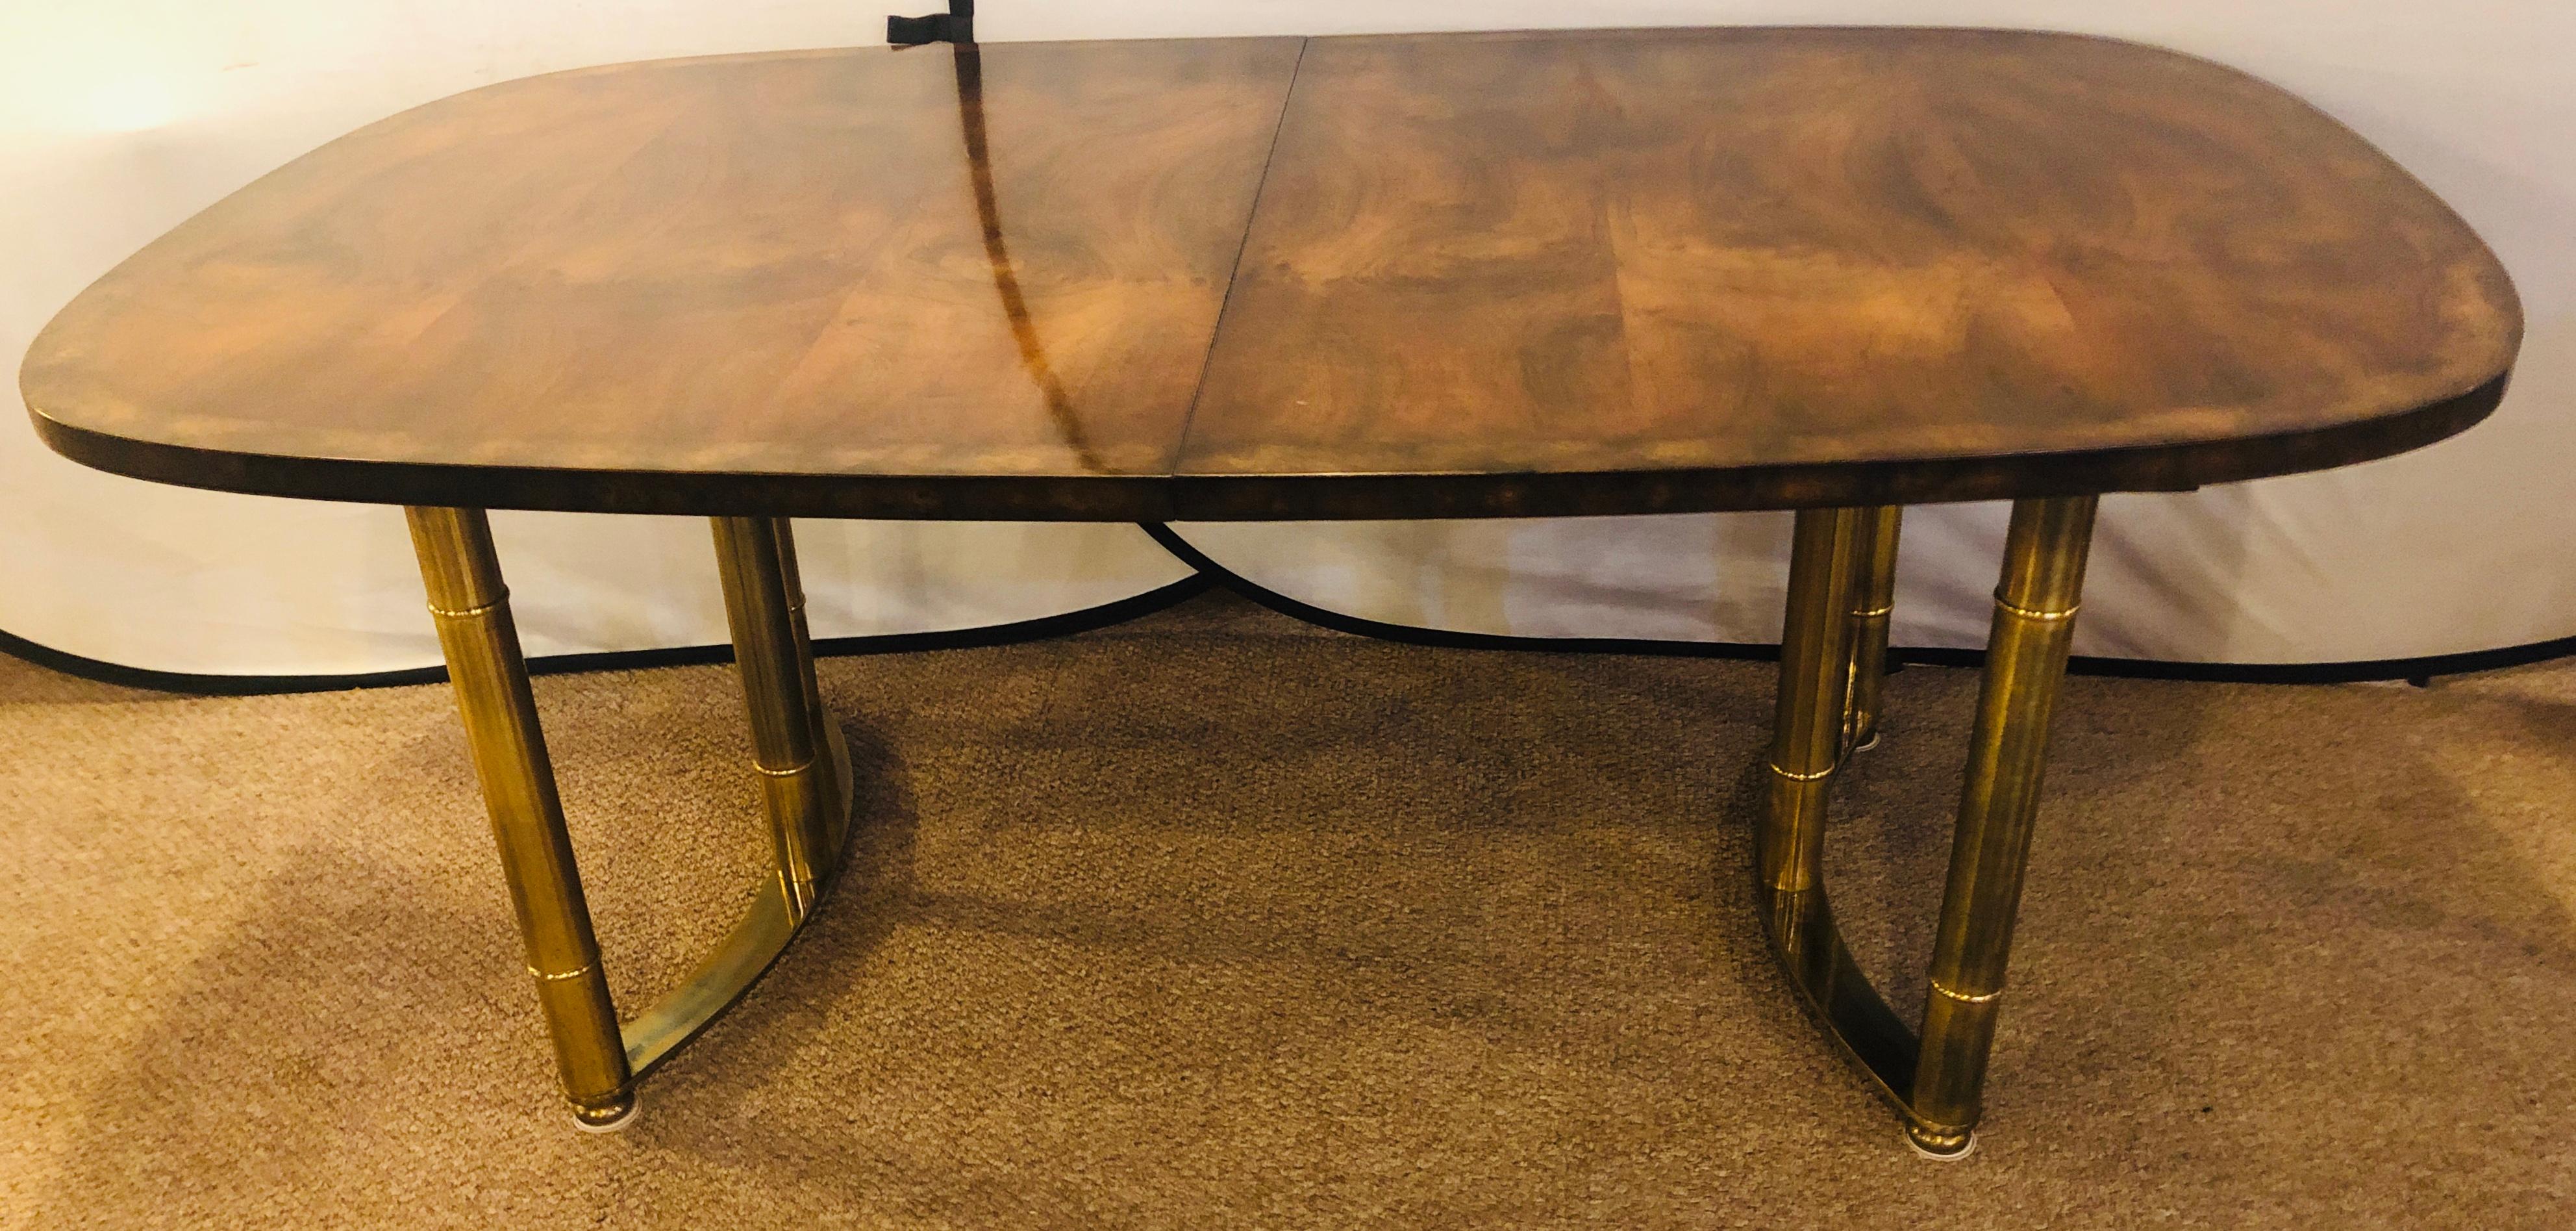 Mid-Century Modern Mastercraft bamboo form brass legged and burl wood dining room table. This finely constructed dining table by this highly sought after design firm is simply stunning. The table having three twenty inch leaves (two never having